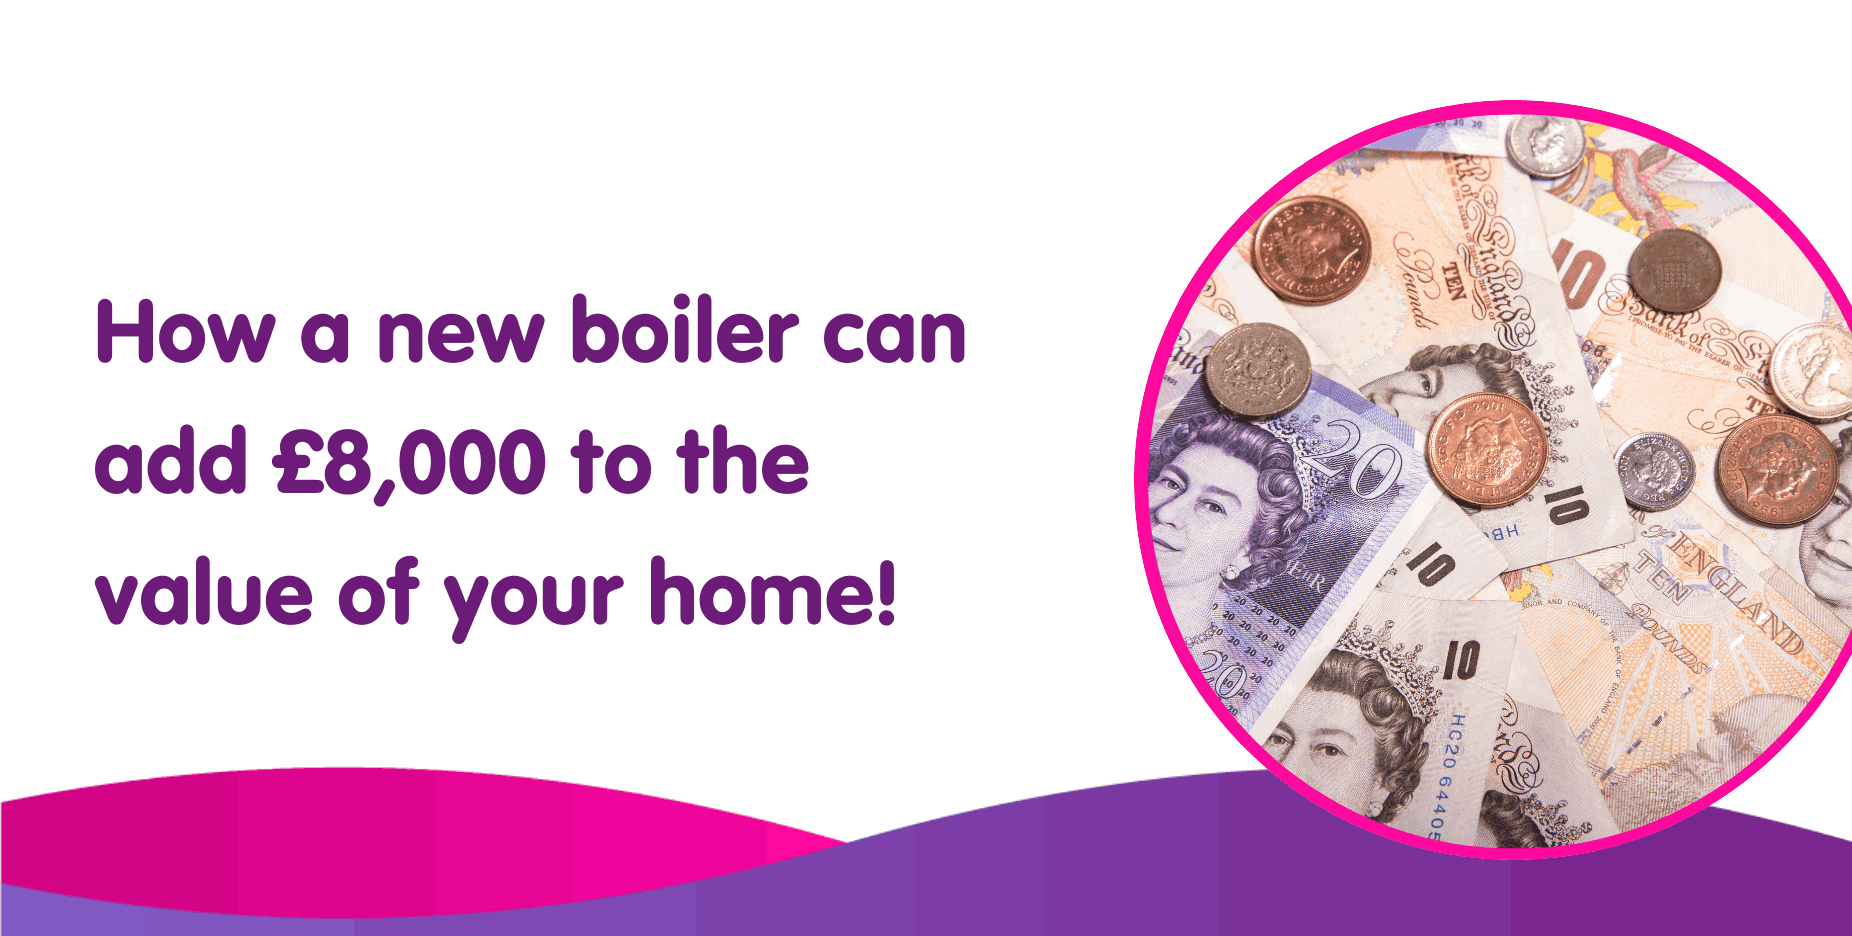 How a new boiler can add £8,000 to the value of your home